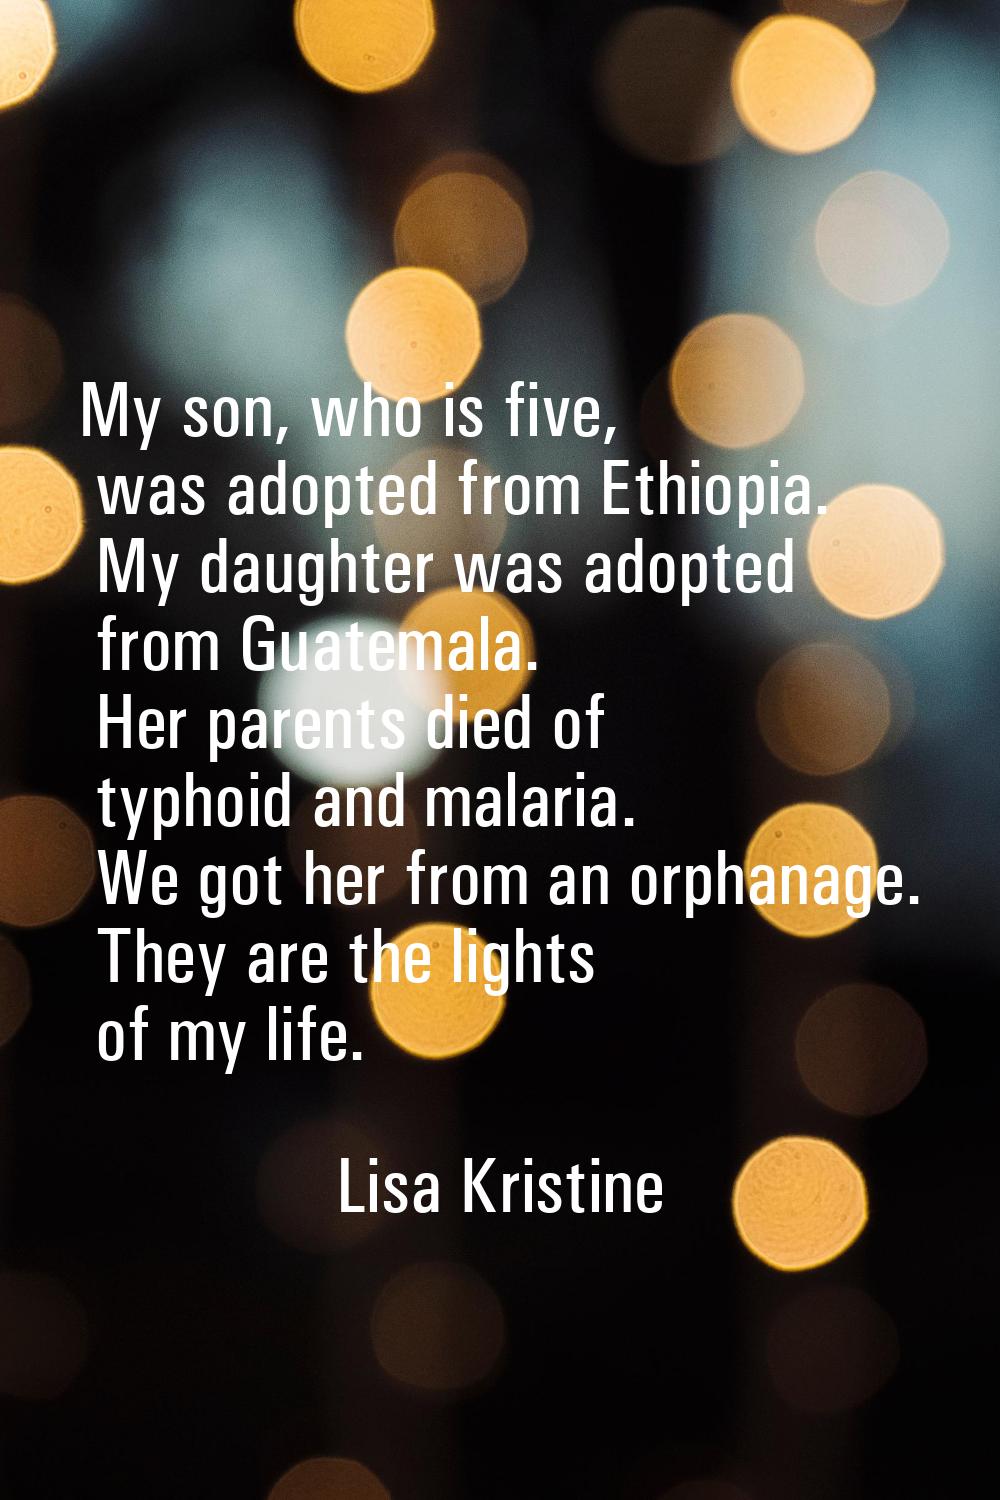 My son, who is five, was adopted from Ethiopia. My daughter was adopted from Guatemala. Her parents